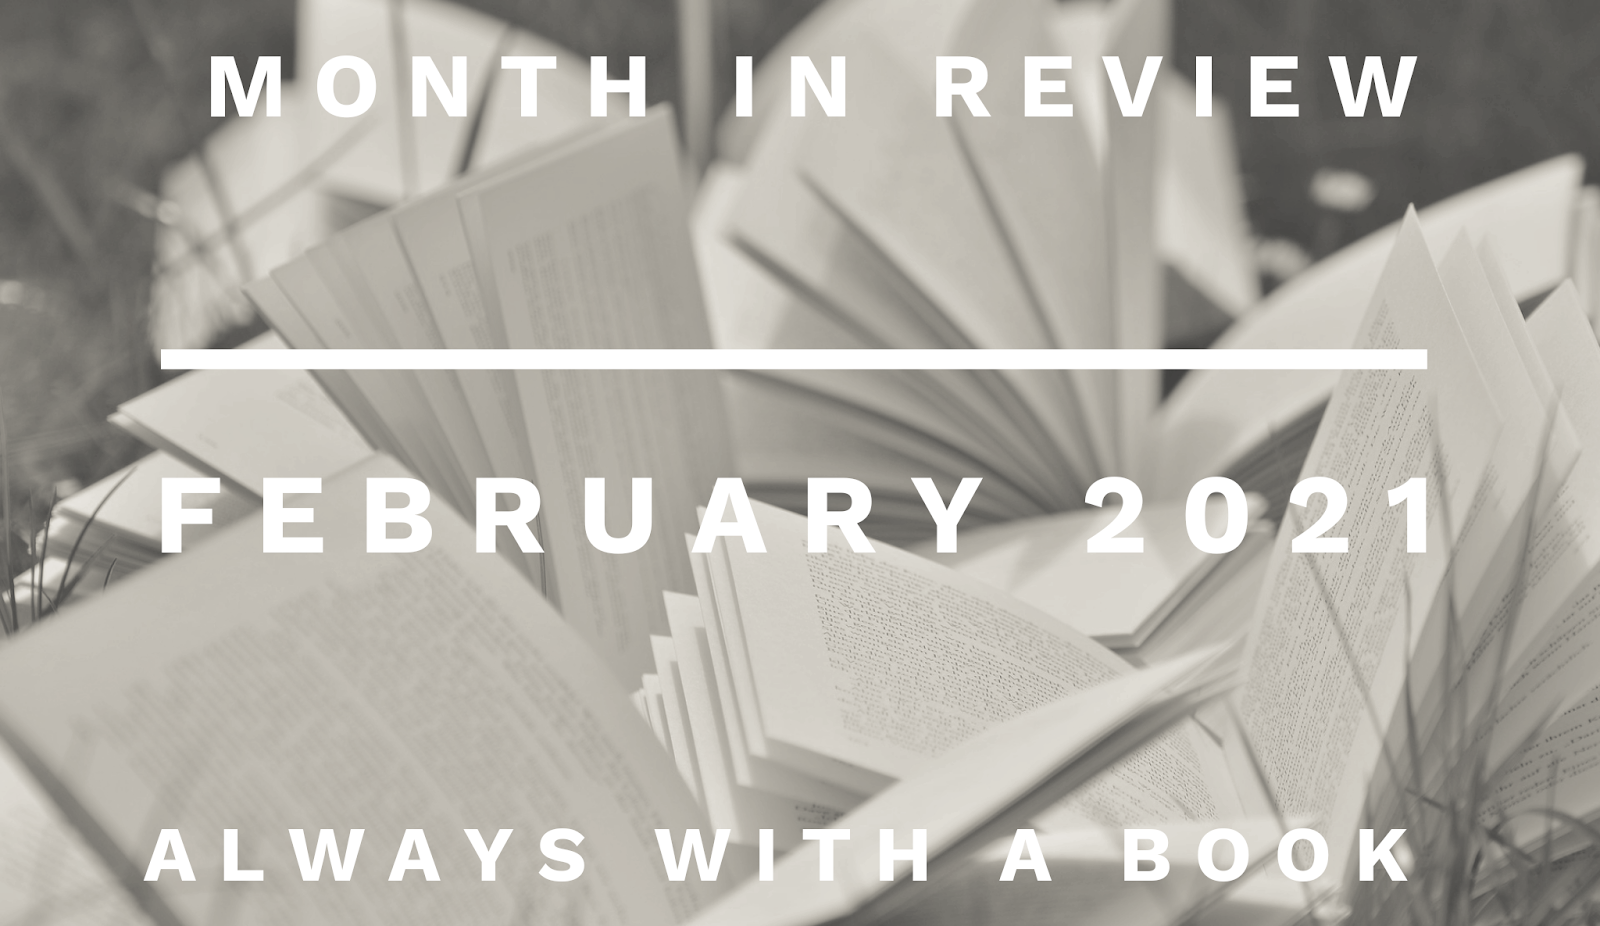 Month in Review: February 2021